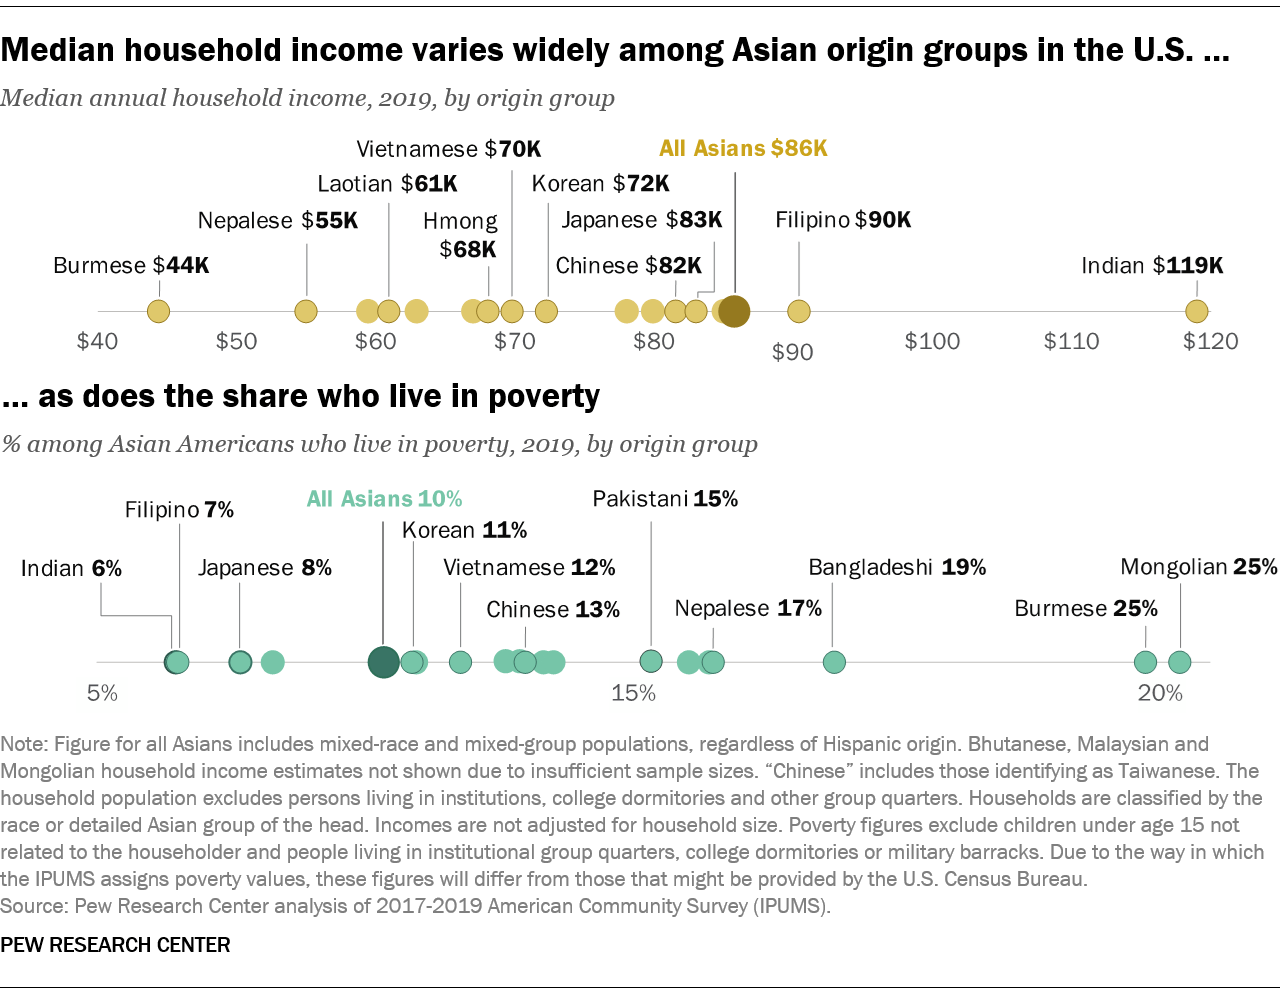 Asian Americans And Their Origins Key Facts Pew Research Center 